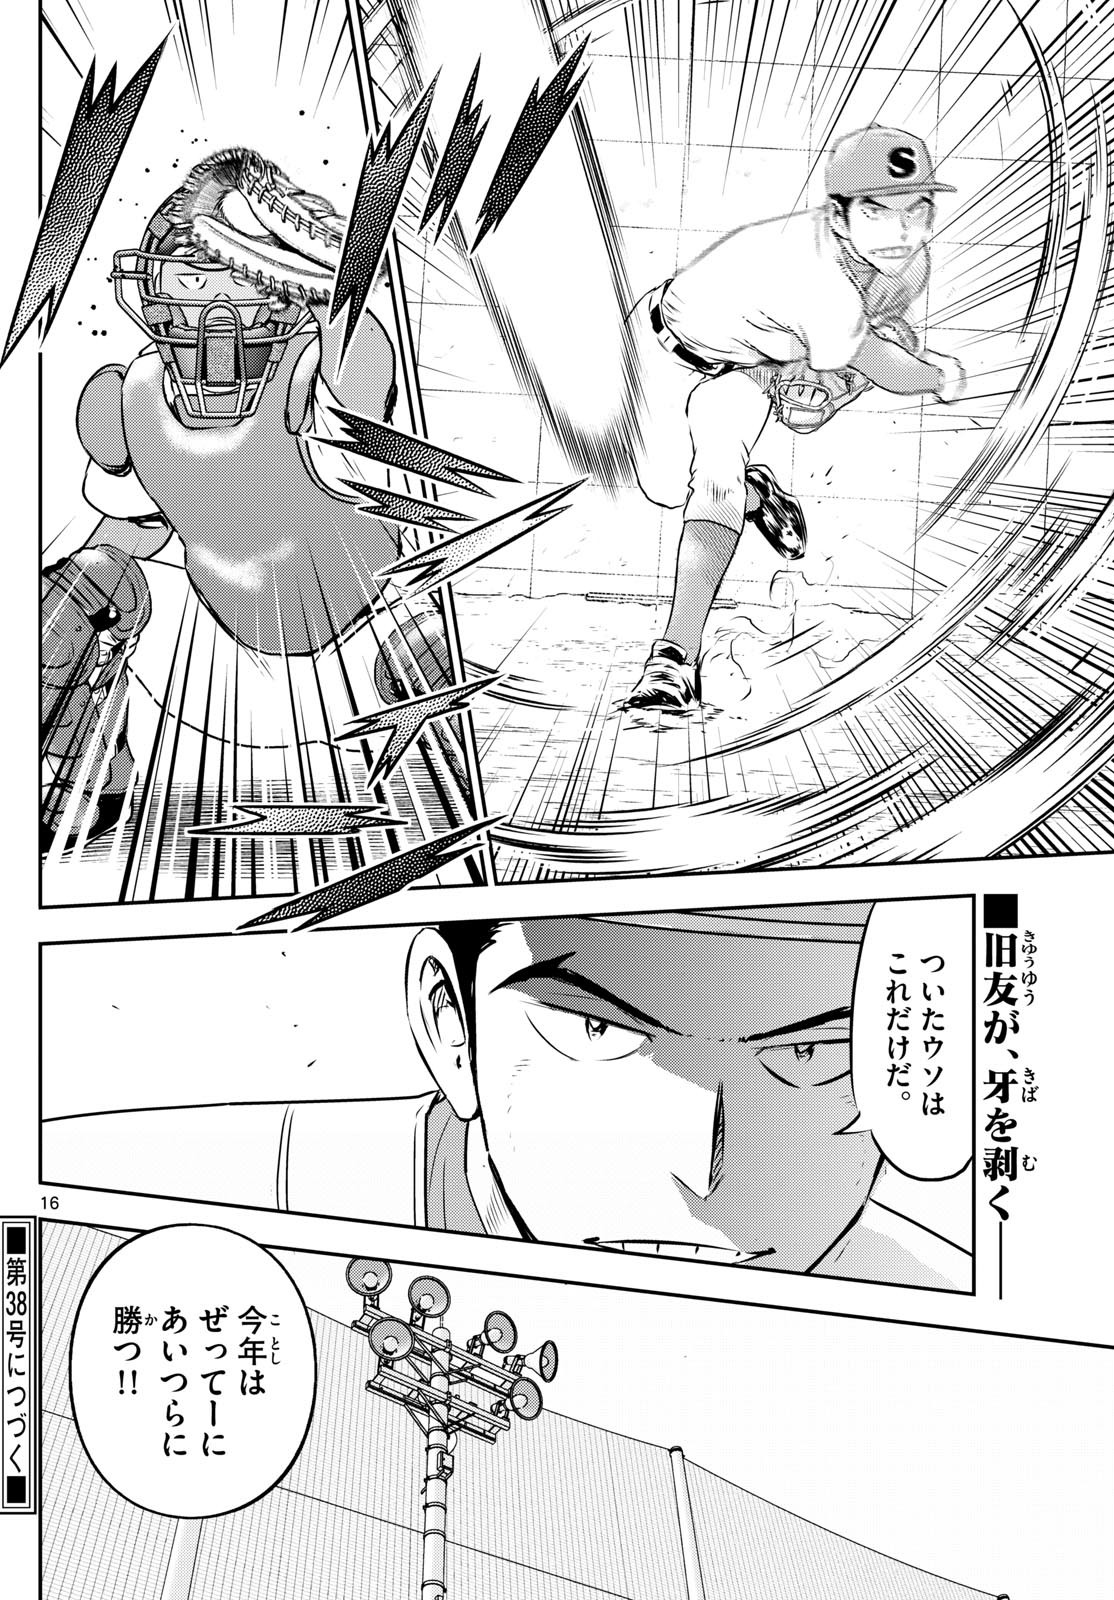 Major 2nd - メジャーセカンド - Chapter 260 - Page 16